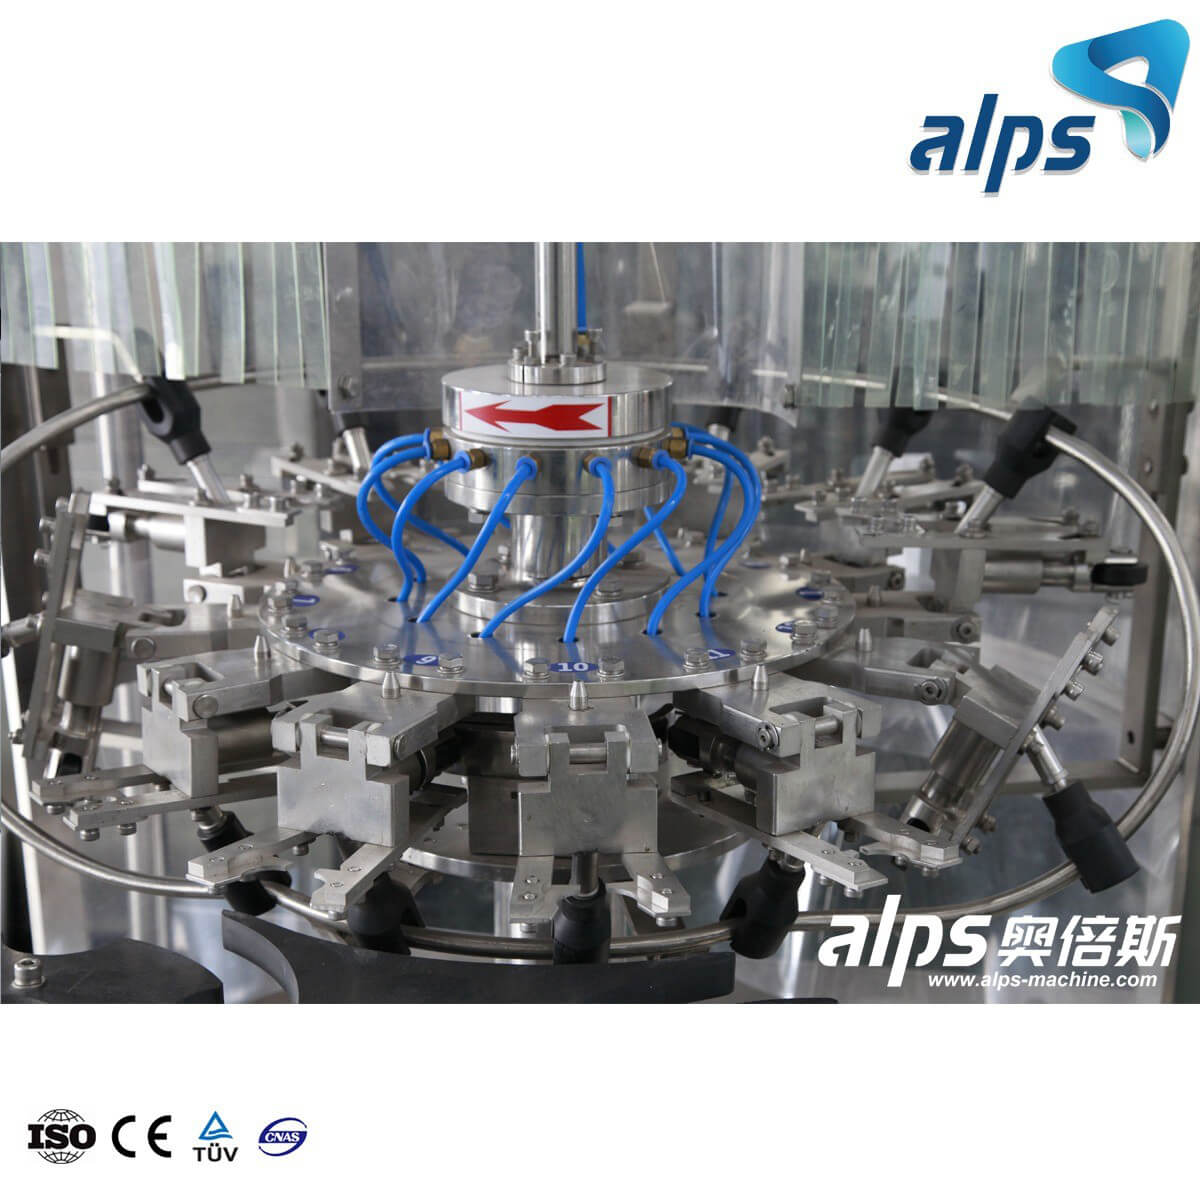 Small Bottle Linear Type Beverage Filling Machine Production Line